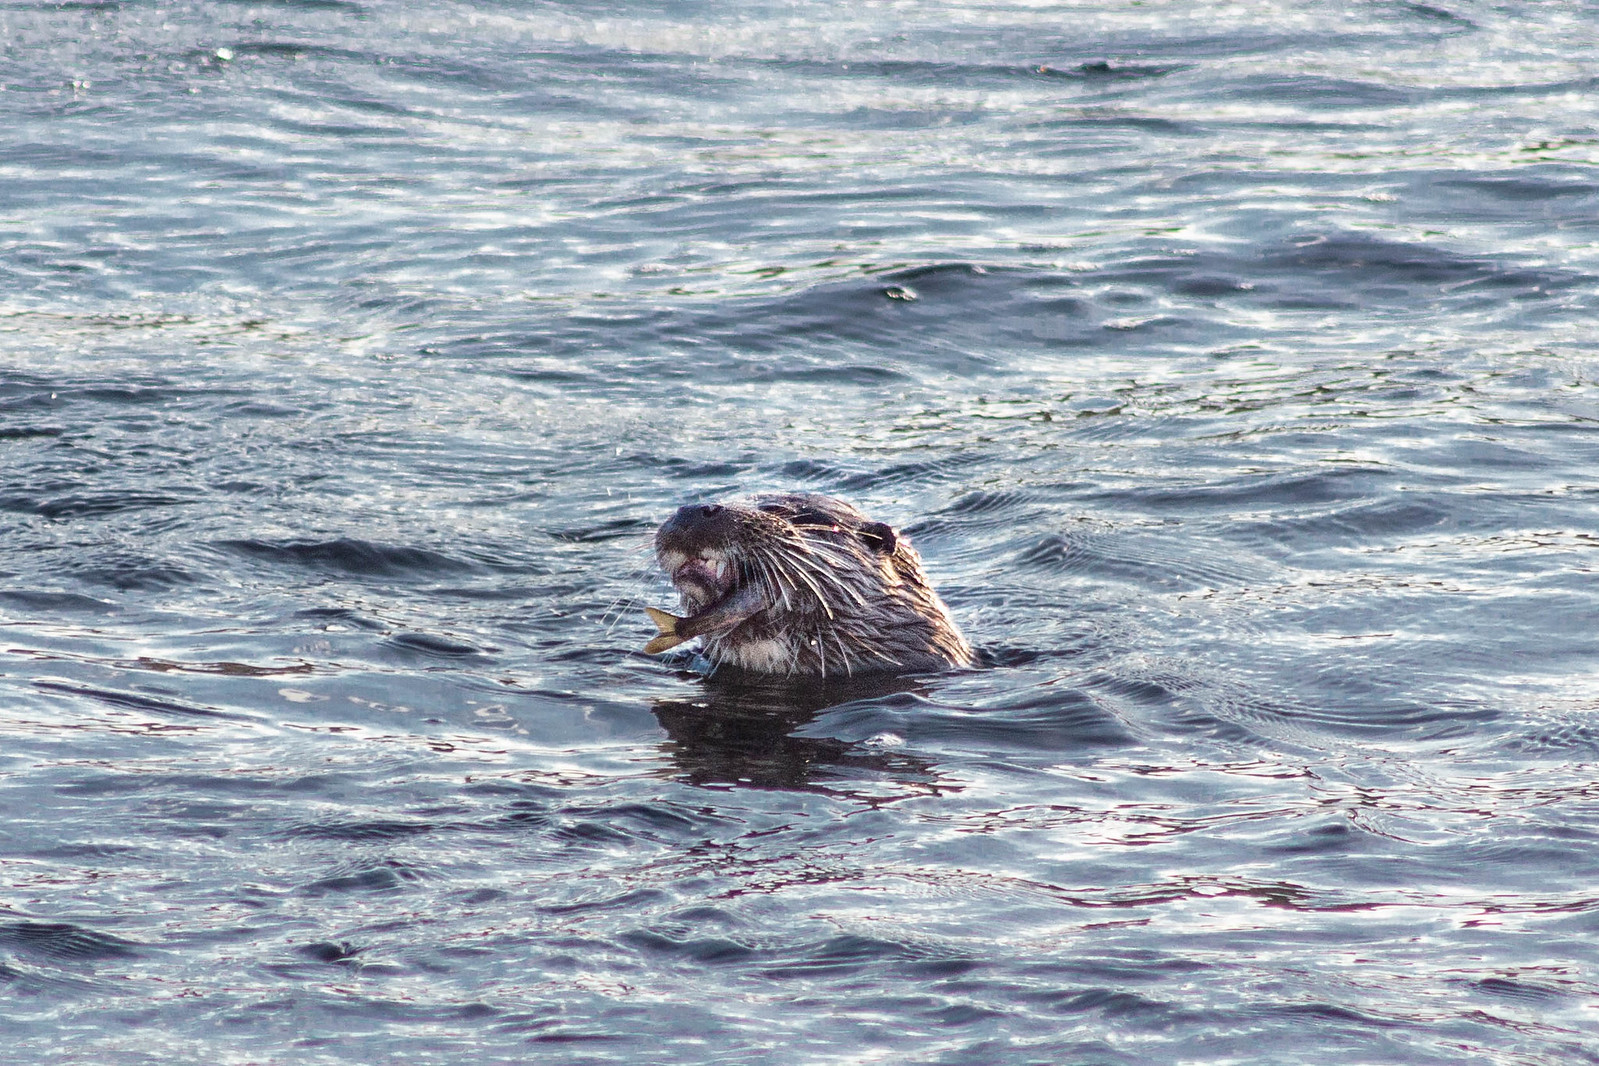 An otters head sticking up out of the water - it's eating a fish.